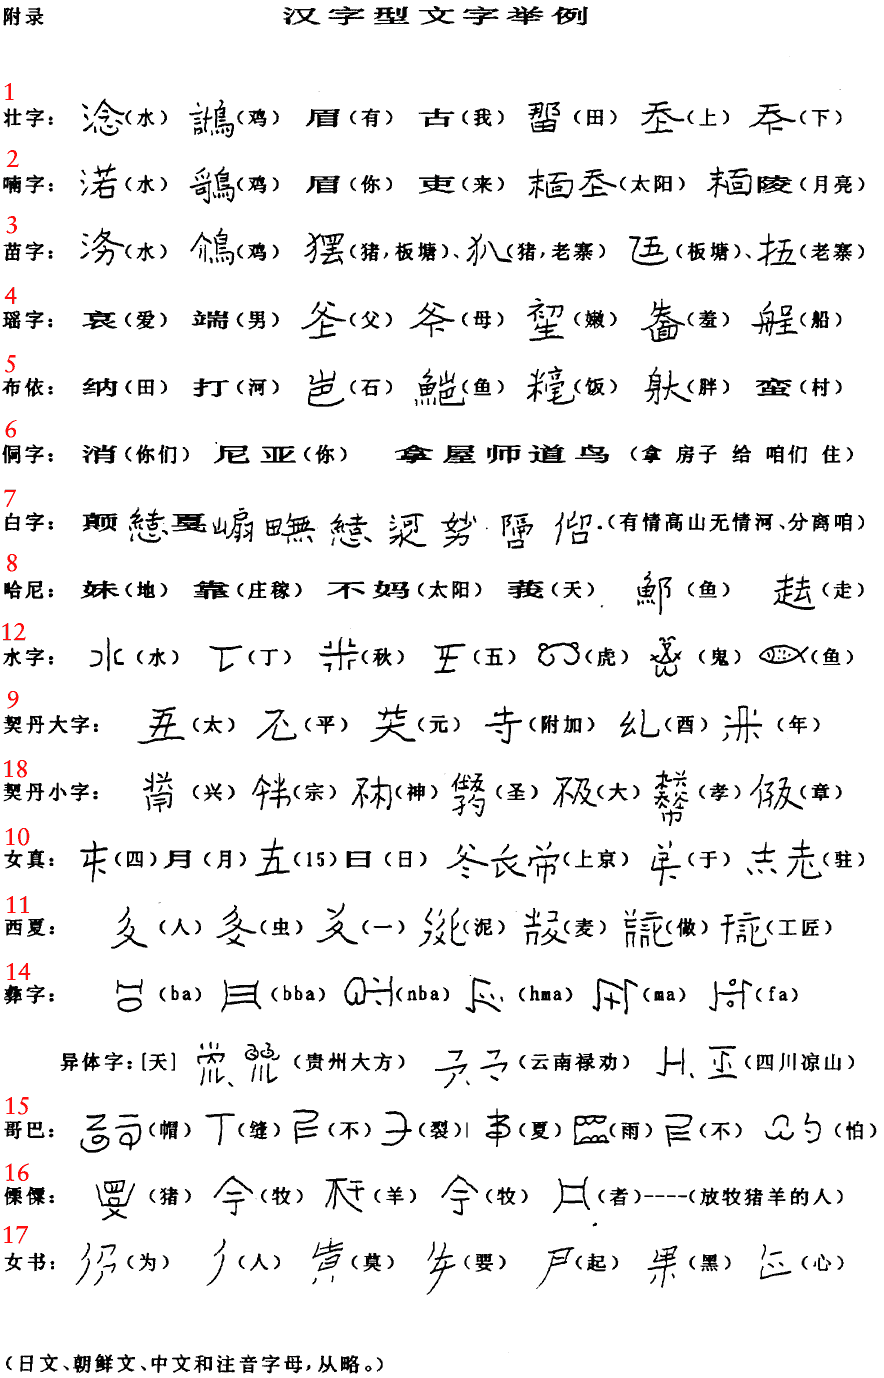 scripts based on Chinese characters